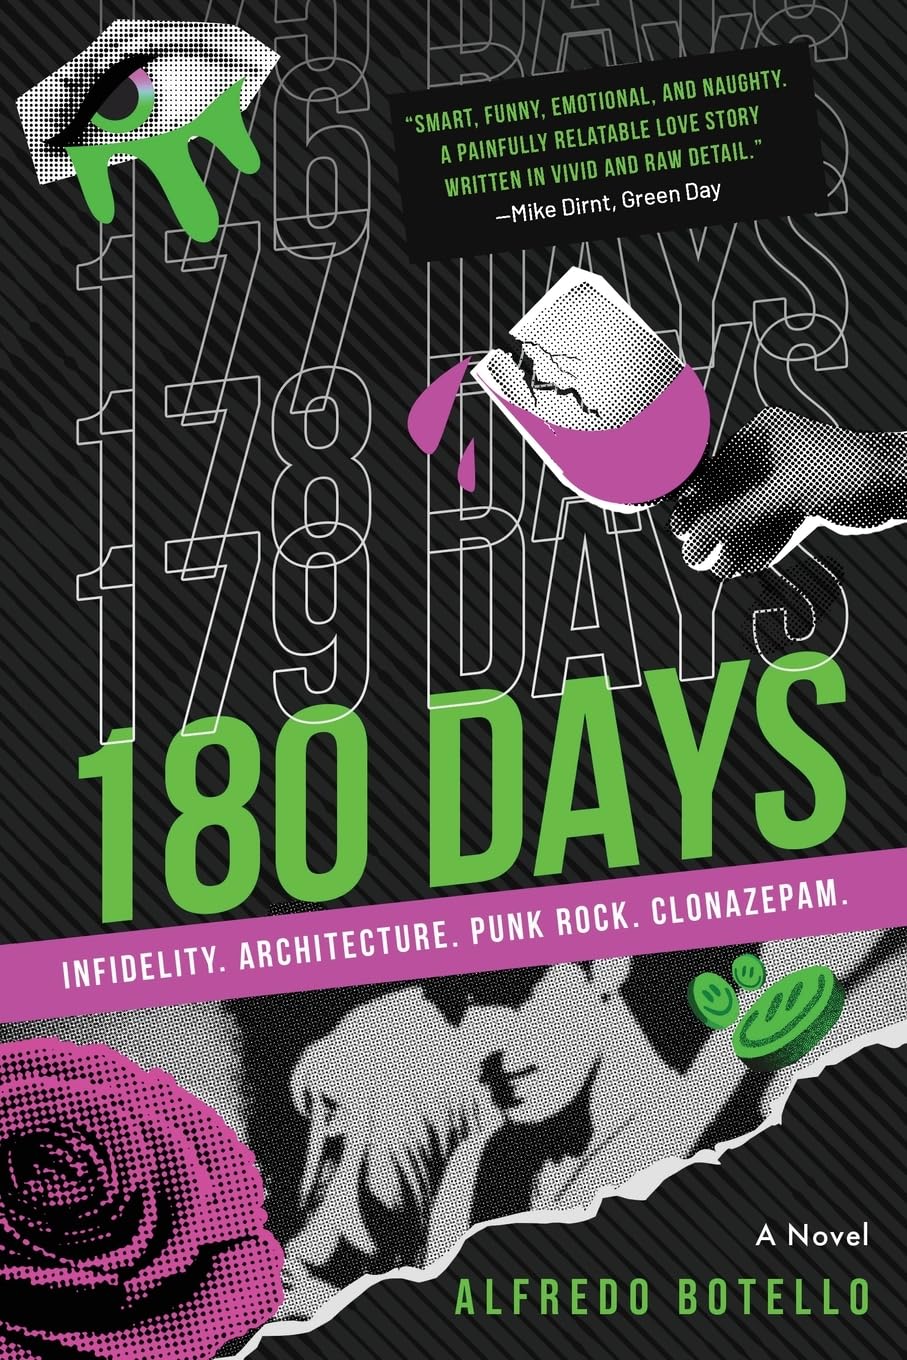 180 Days by Alfredo Botello - A Bold Exploration of Love, Infidelity, and the Pursuit of Redemption